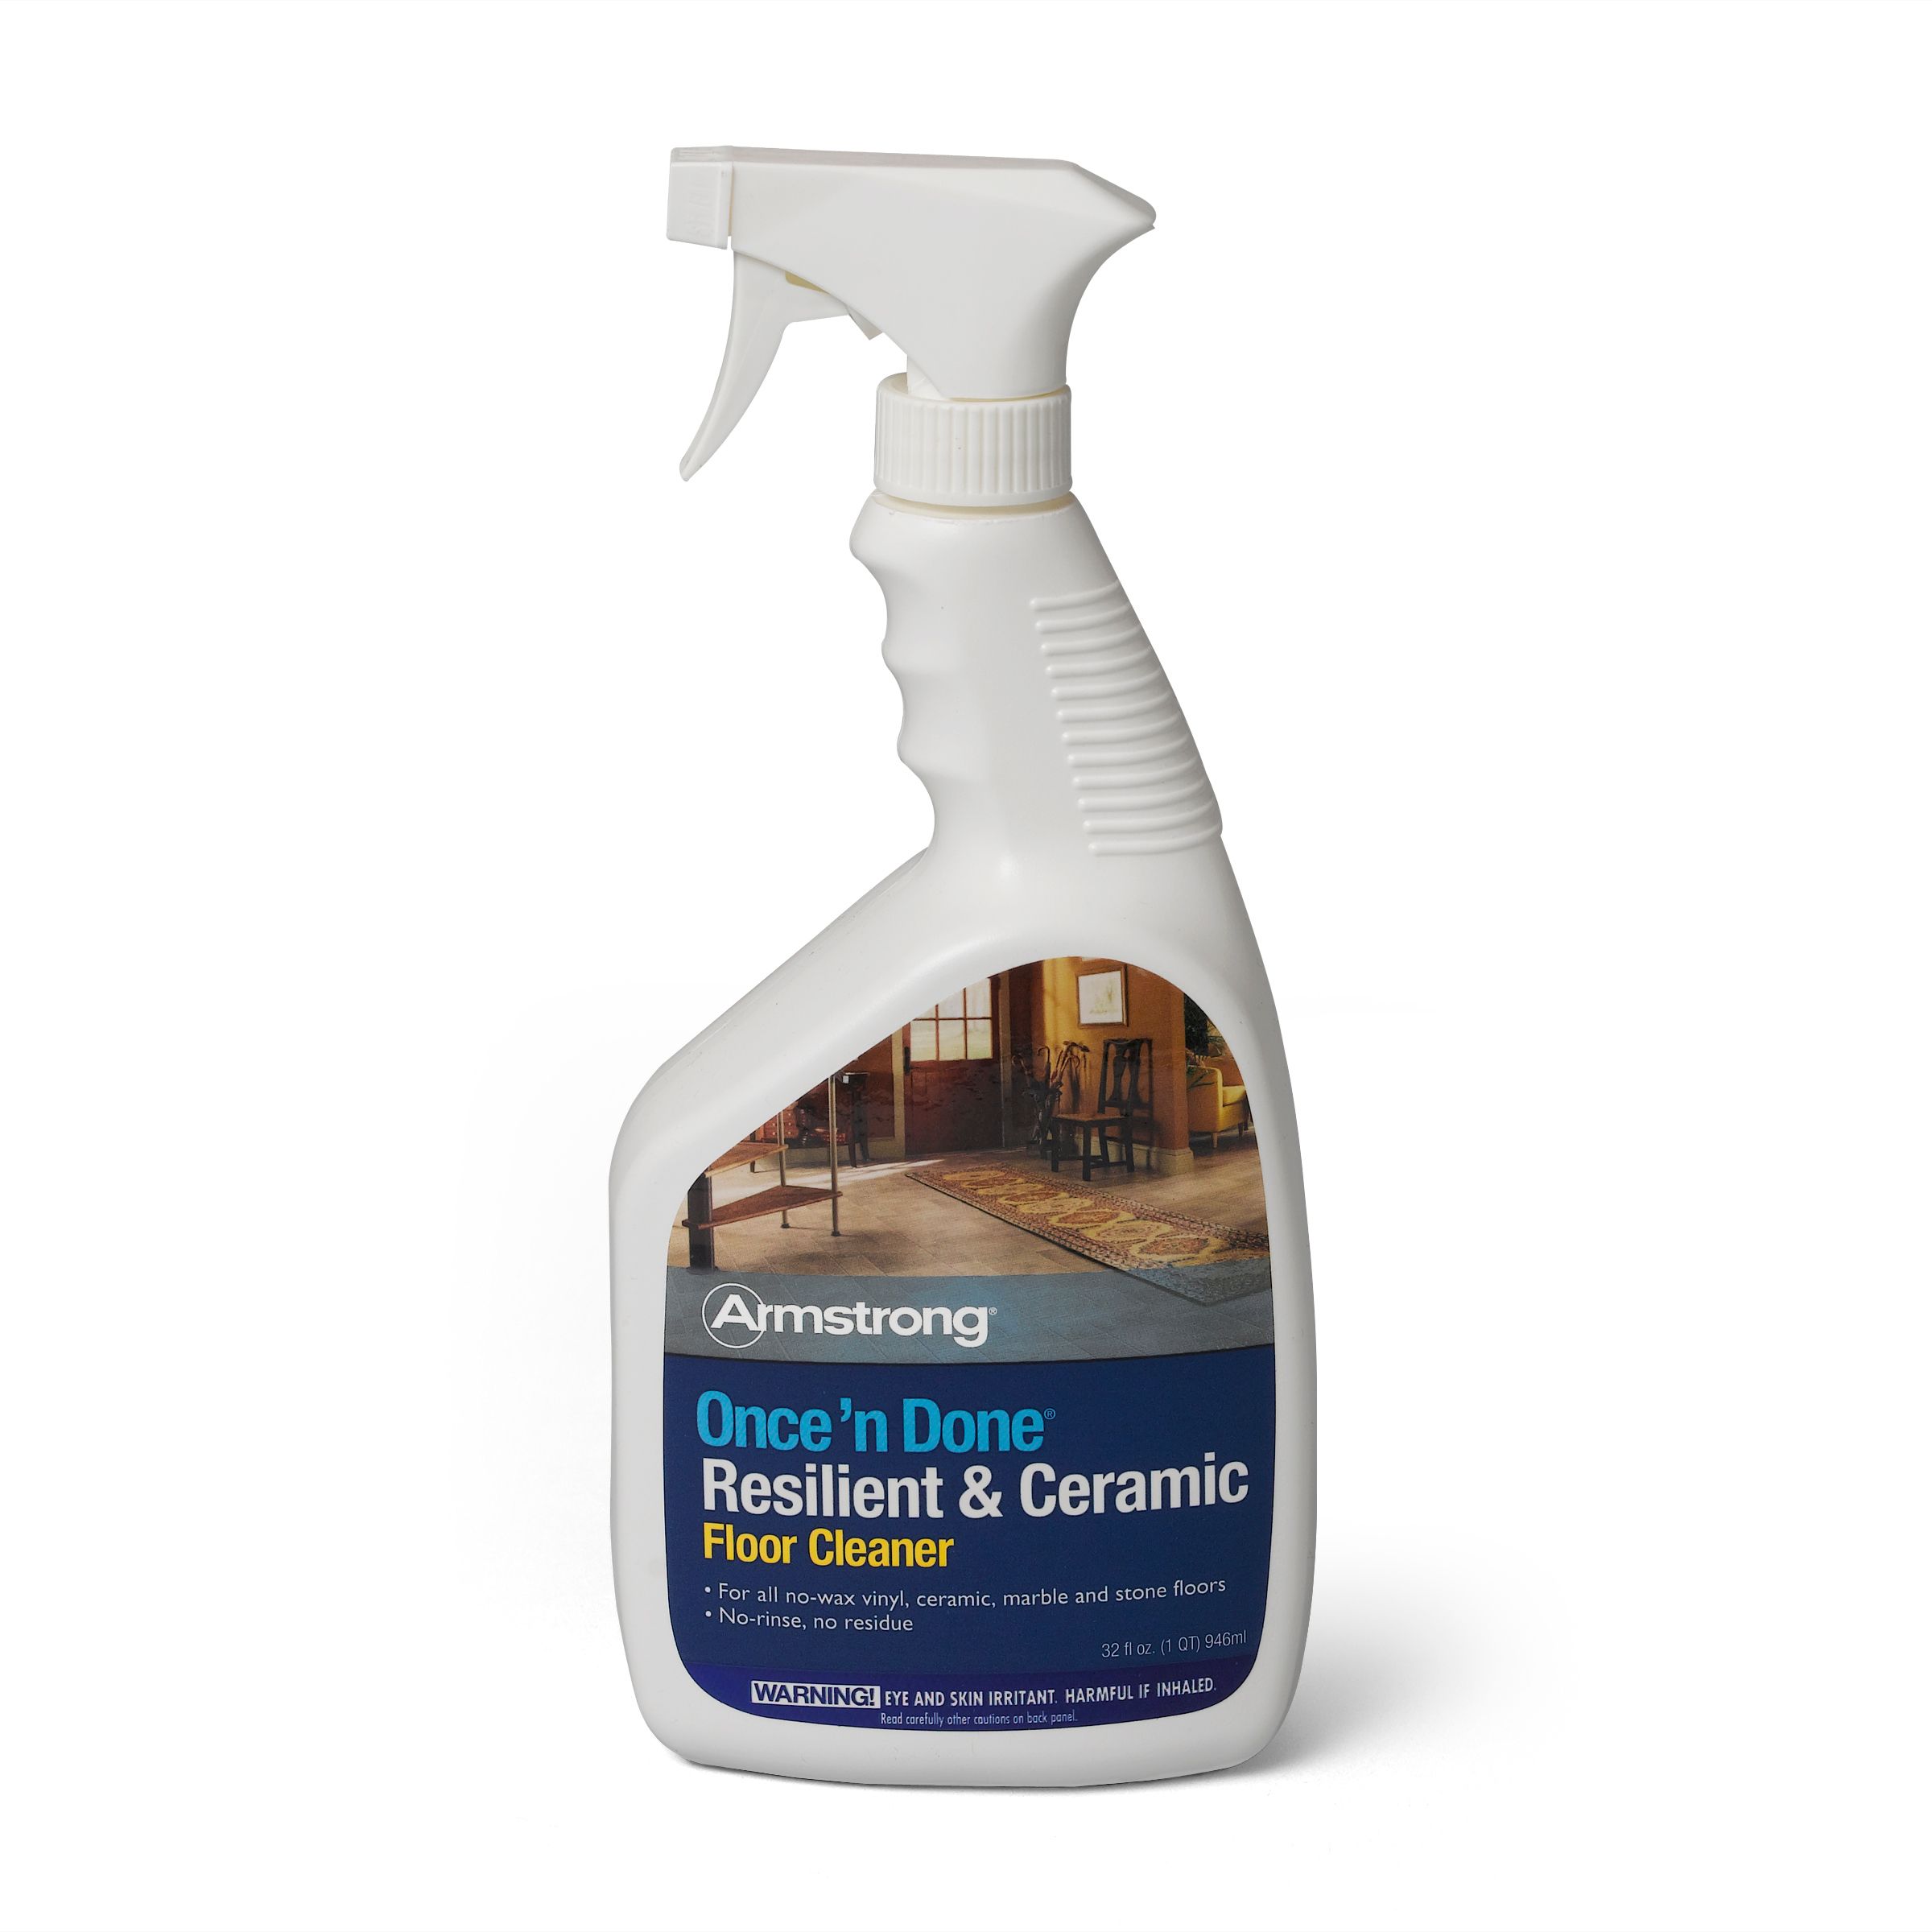 Armstrong Once 'n Done Resilient & Ceramic Floor Cleaner Trigger Spray